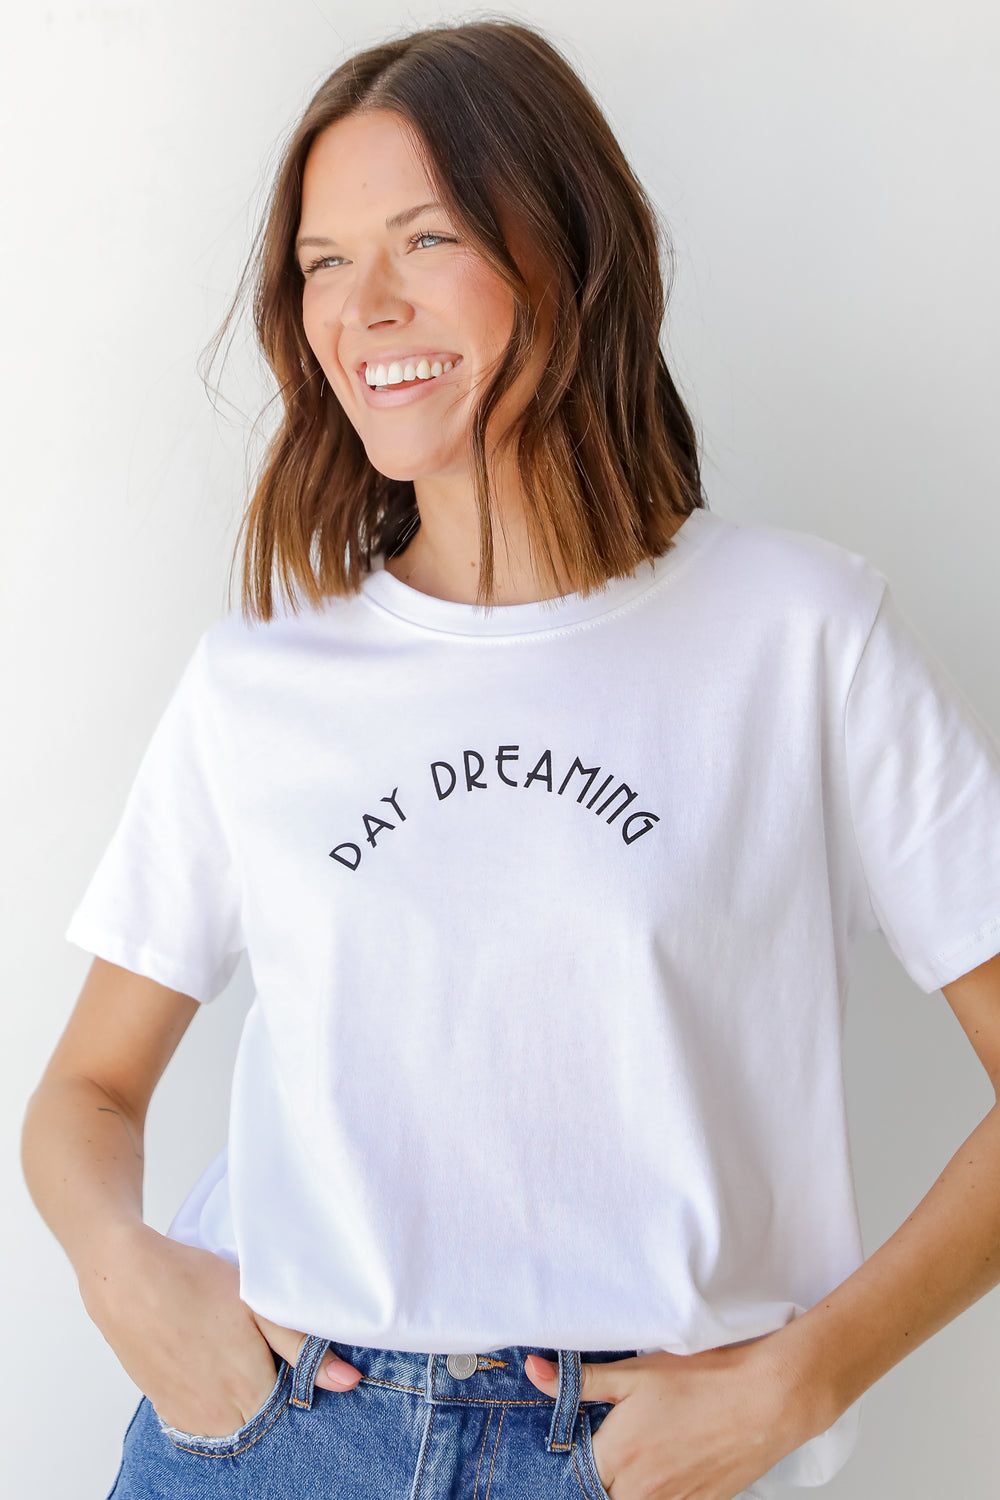 Day Dreaming Graphic Tee from dress up